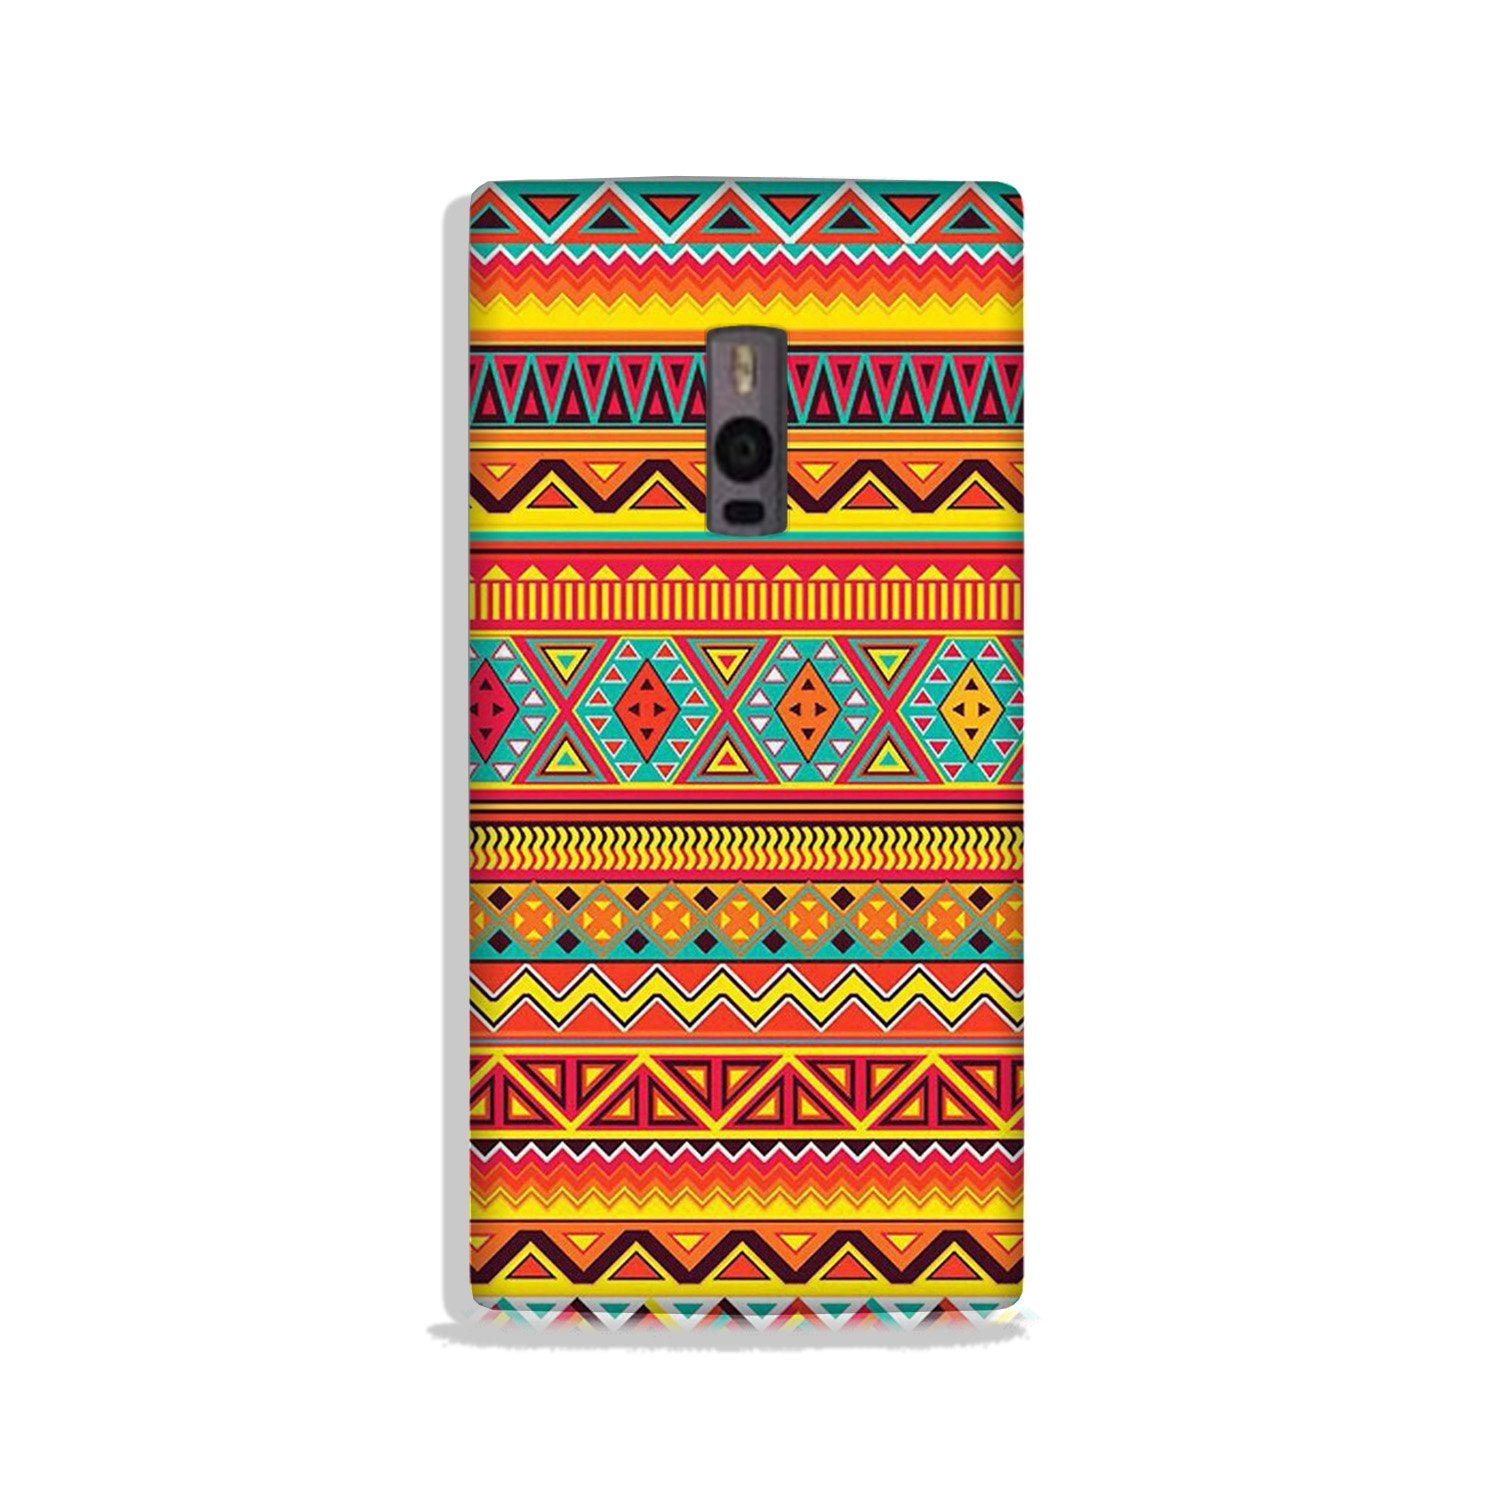 Zigzag line pattern Case for OnePlus 2